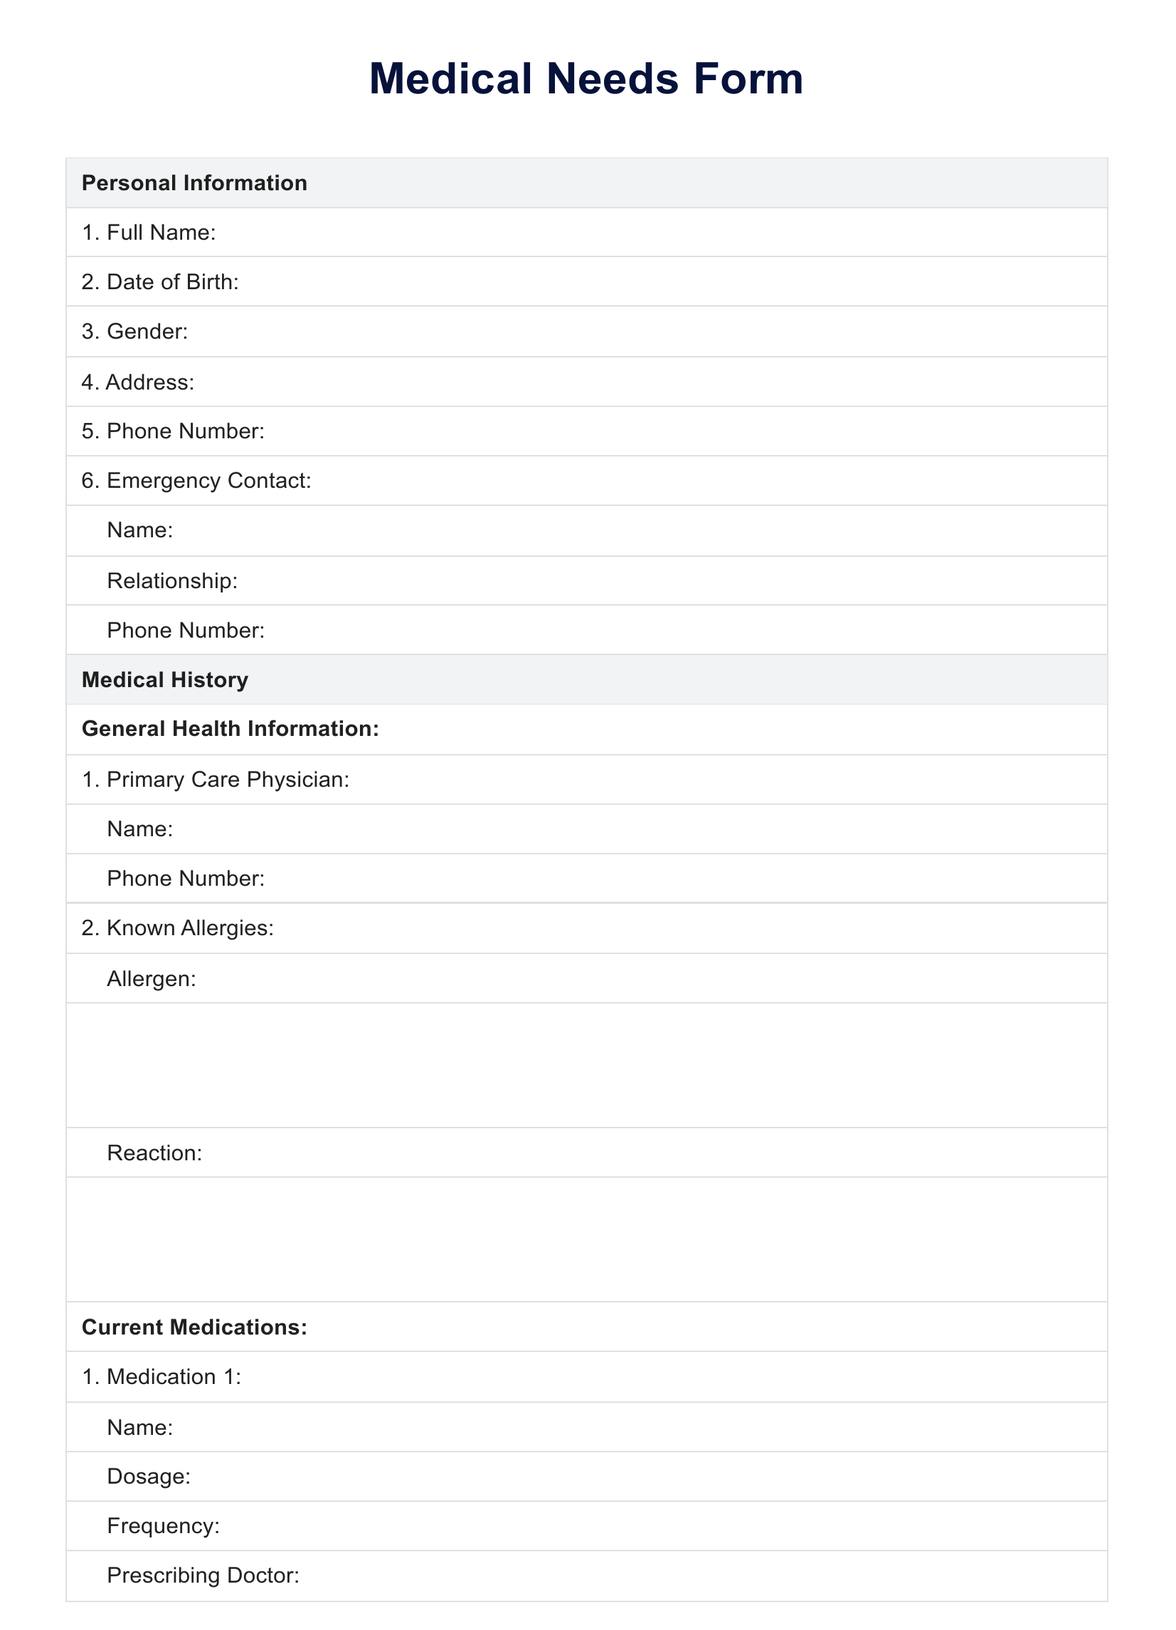 Medical Needs Form PDF Example